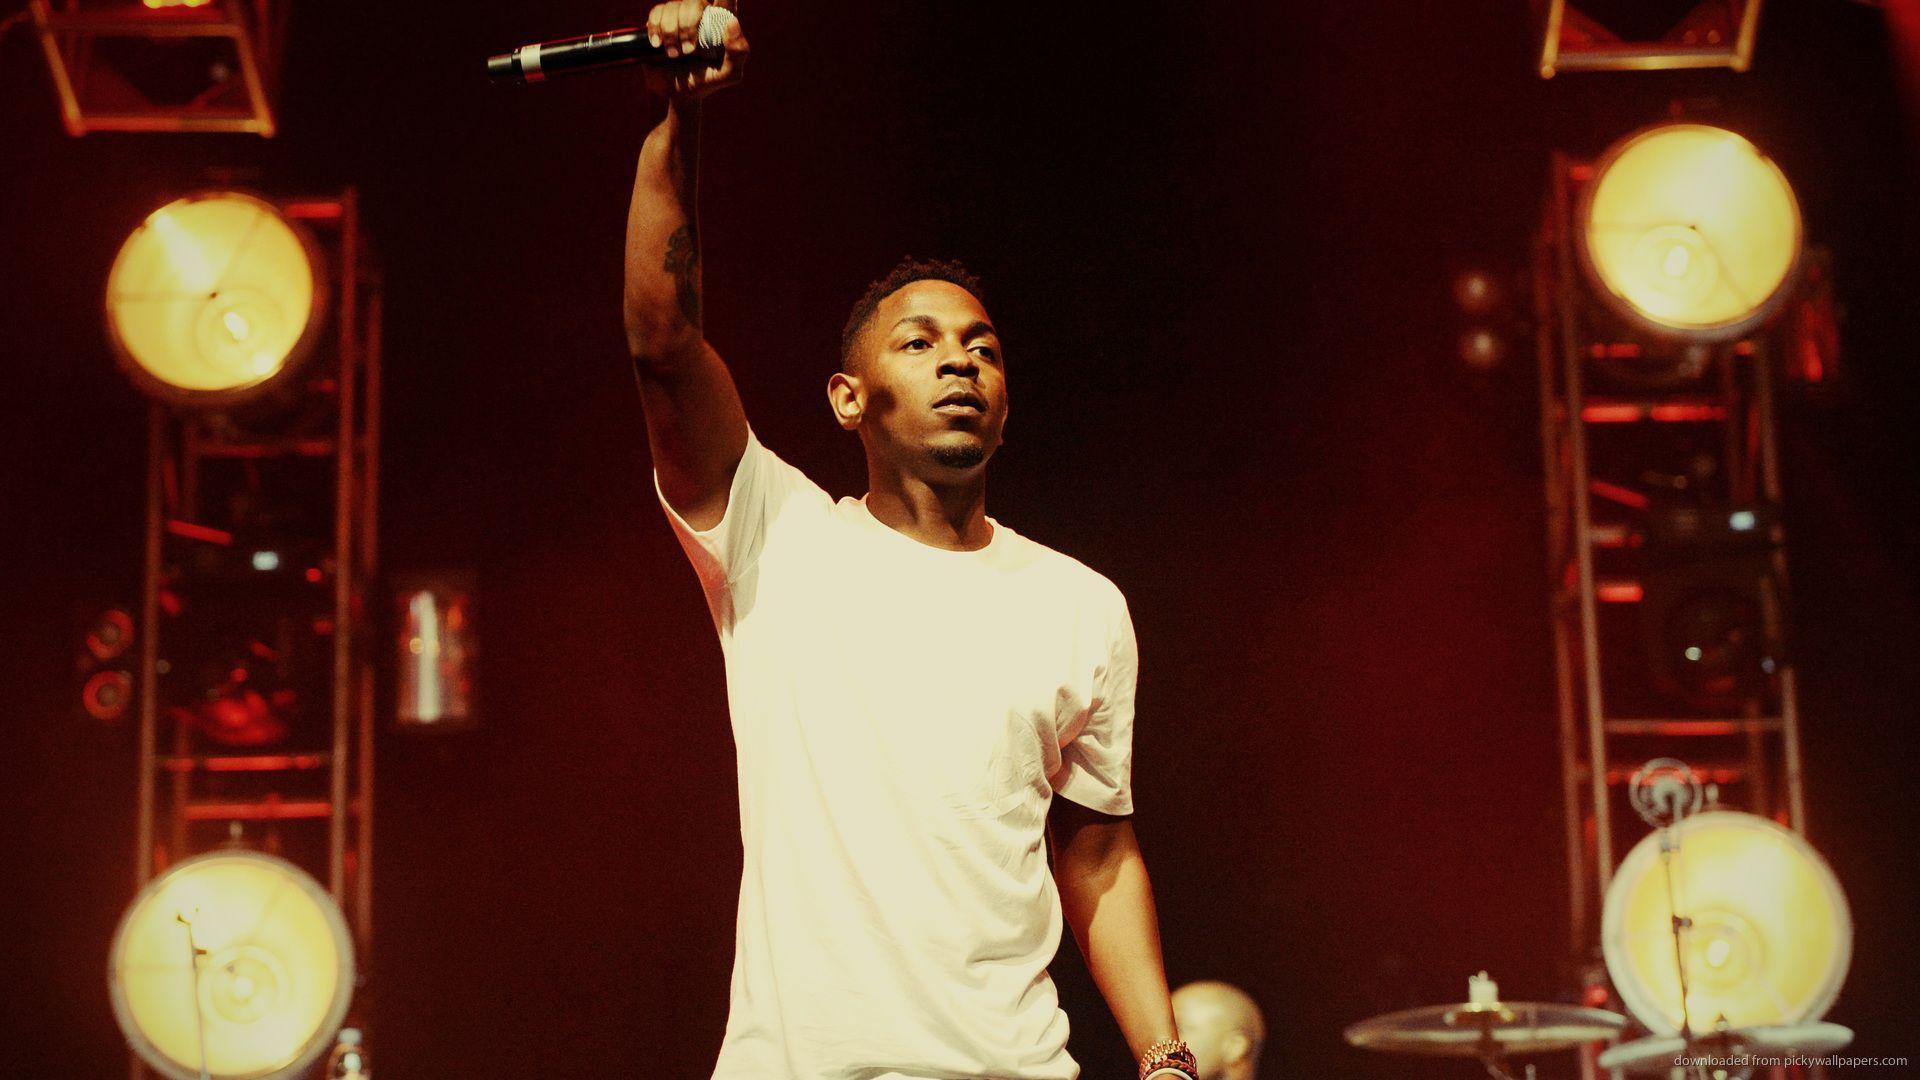 Download 1920x1080 Kendrick Lamar With Mic Wallpapers